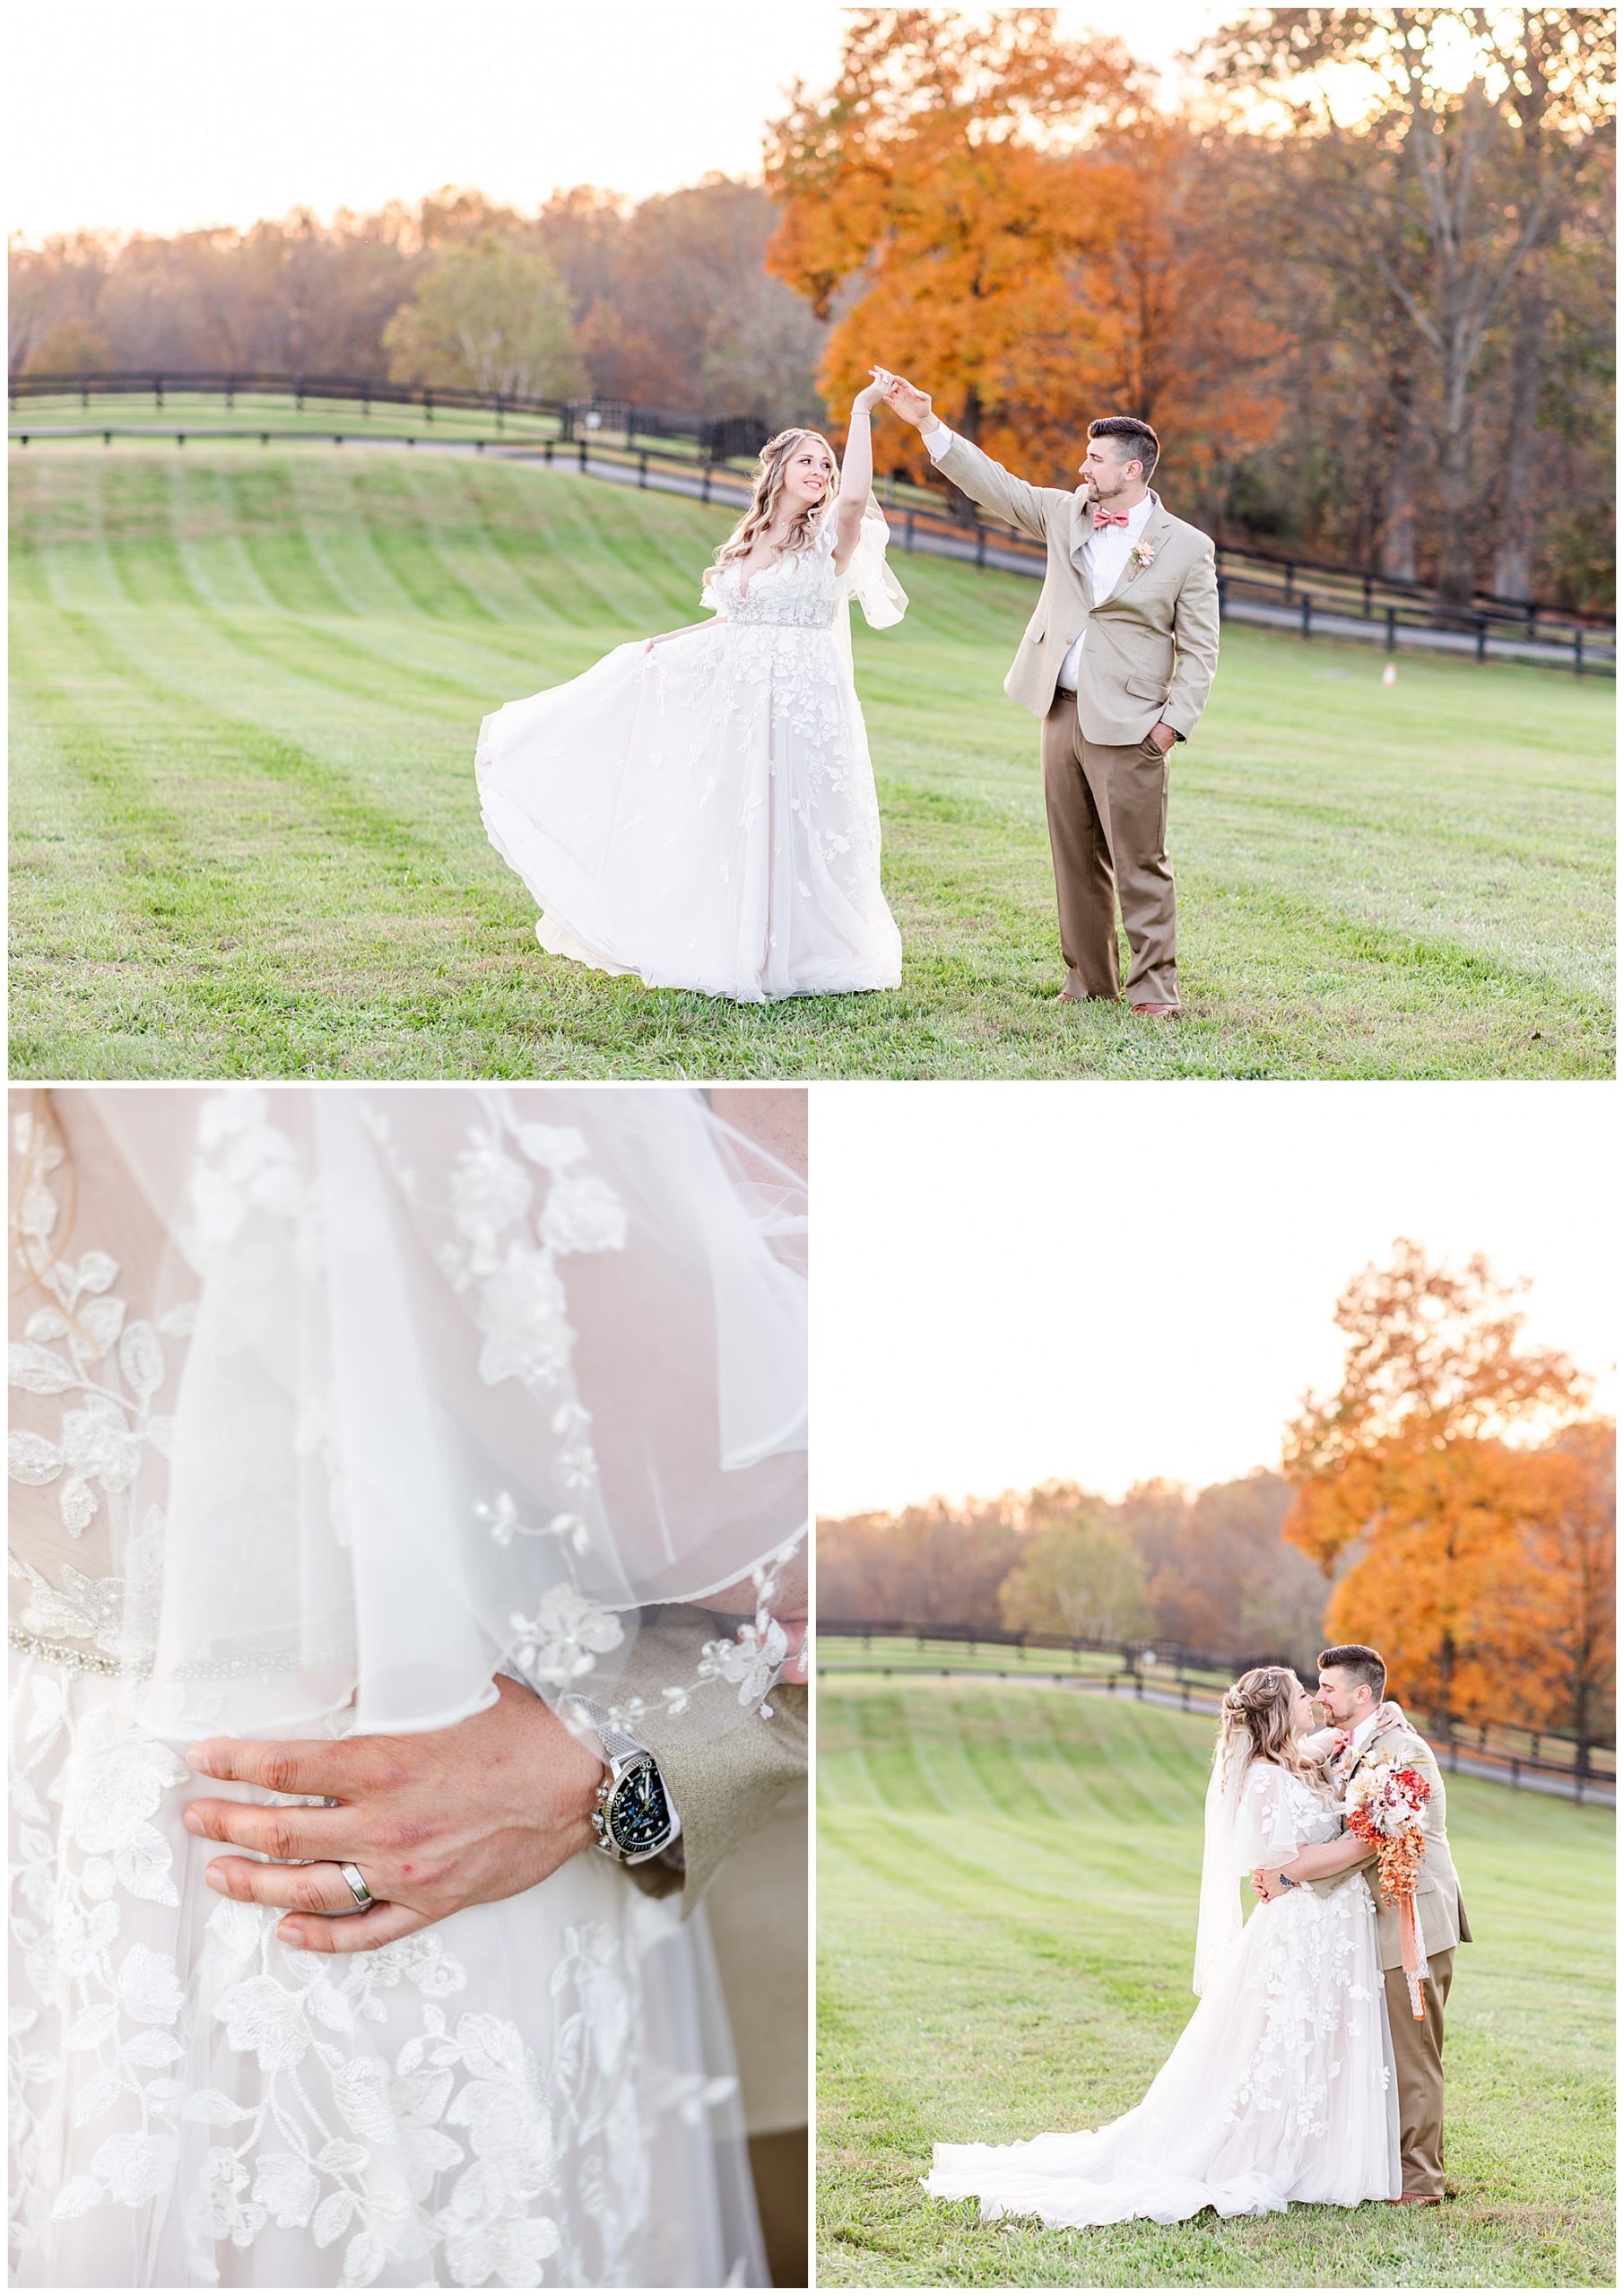 fall colors Middleburg Virginia wedding, Middleburg wedding, Middleburg wedding photographer, Loudoun County wedding photographer, northern Virginia wedding photographer, Middleburg Barn wedding, autumn wedding aesthetic, barn wedding aesthetic, elegant barn wedding, DC wedding photographer, Rachel E.H. Photography, groom spinning bride, grooms hand on brides waist, bride and groom almost kissing in field 